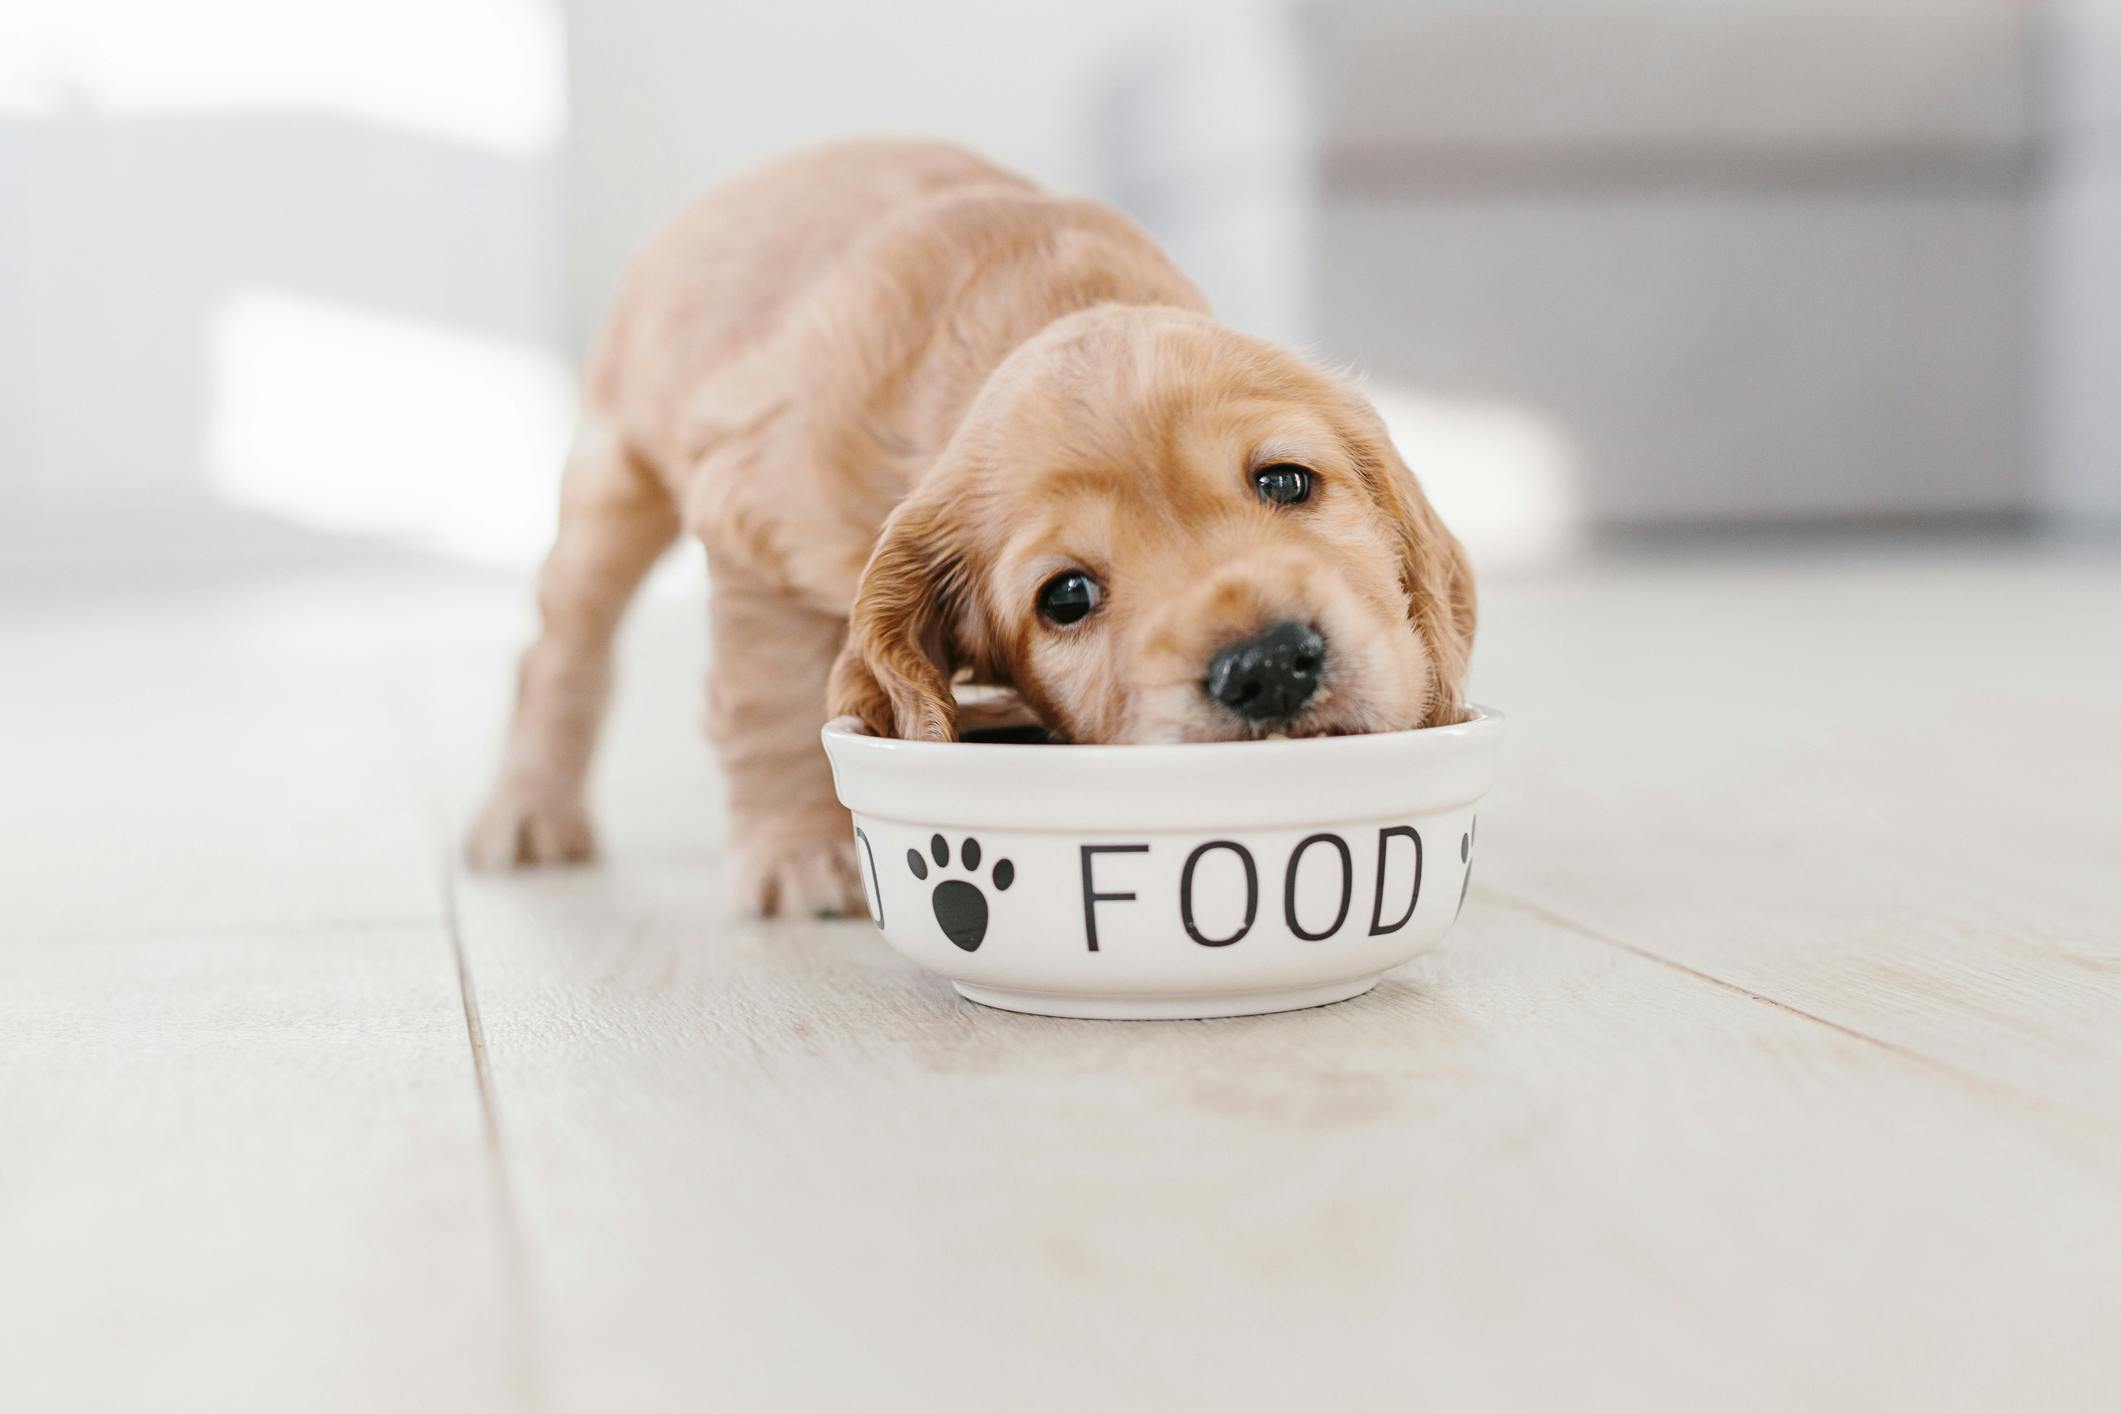 Puppy eating out of a food bowl on the floor.